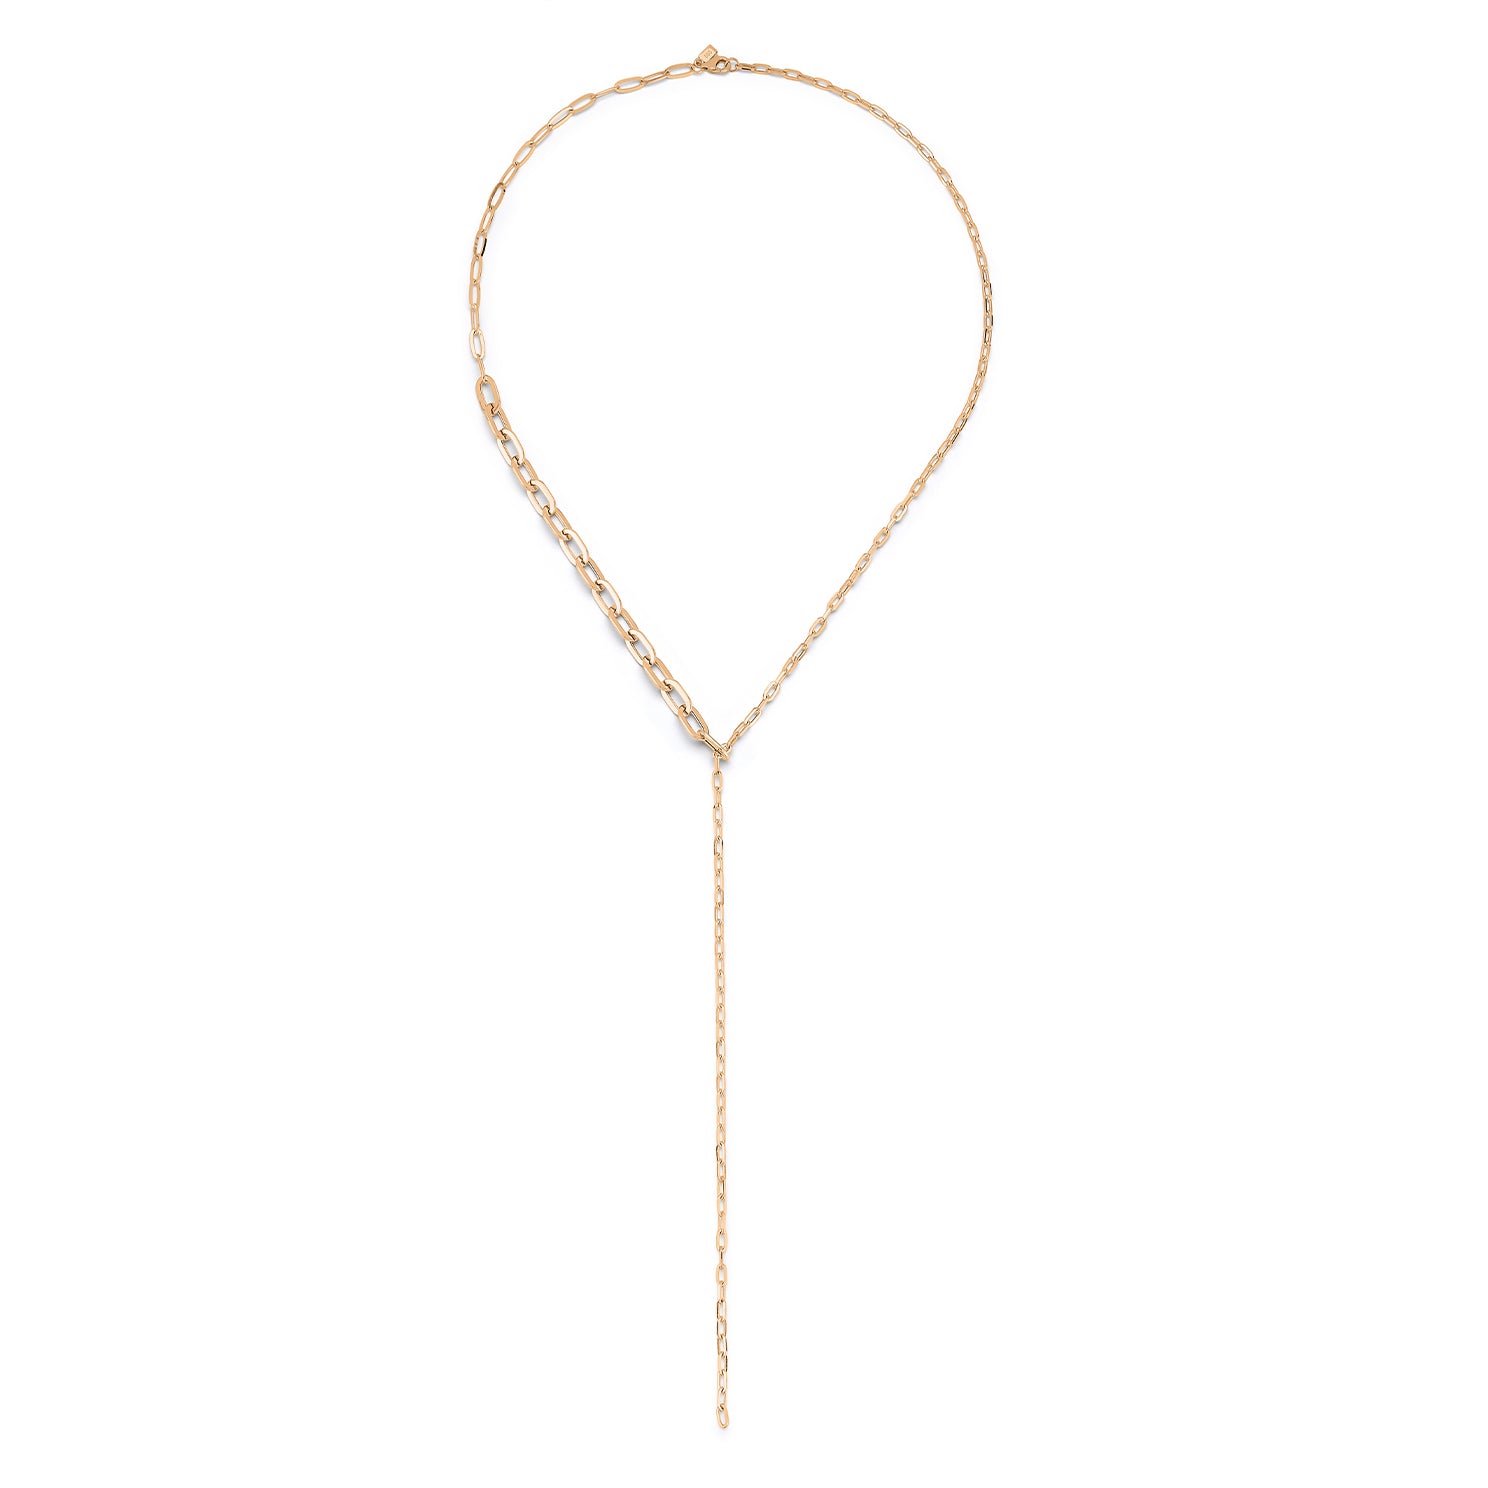 Graduated Chain Link Lariat Necklace in 14k rose gold